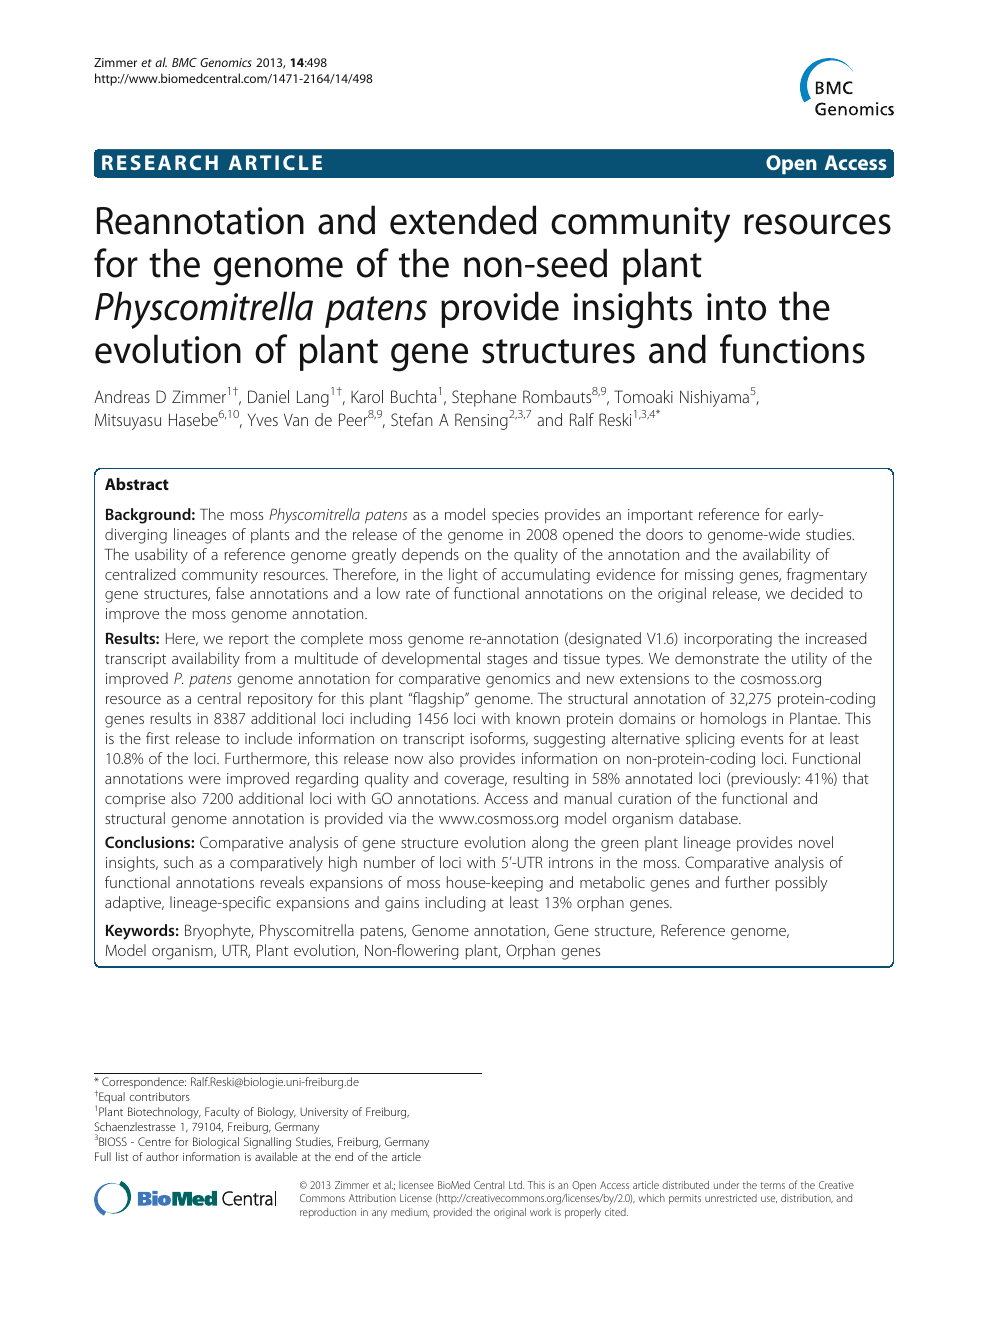 Reannotation And Extended Community Resources For The Genome Of The Non Seed Plant Physcomitrella Patens Provide Insights Into The Evolution Of Plant Gene Structures And Functions Topic Of Research Paper In Biological